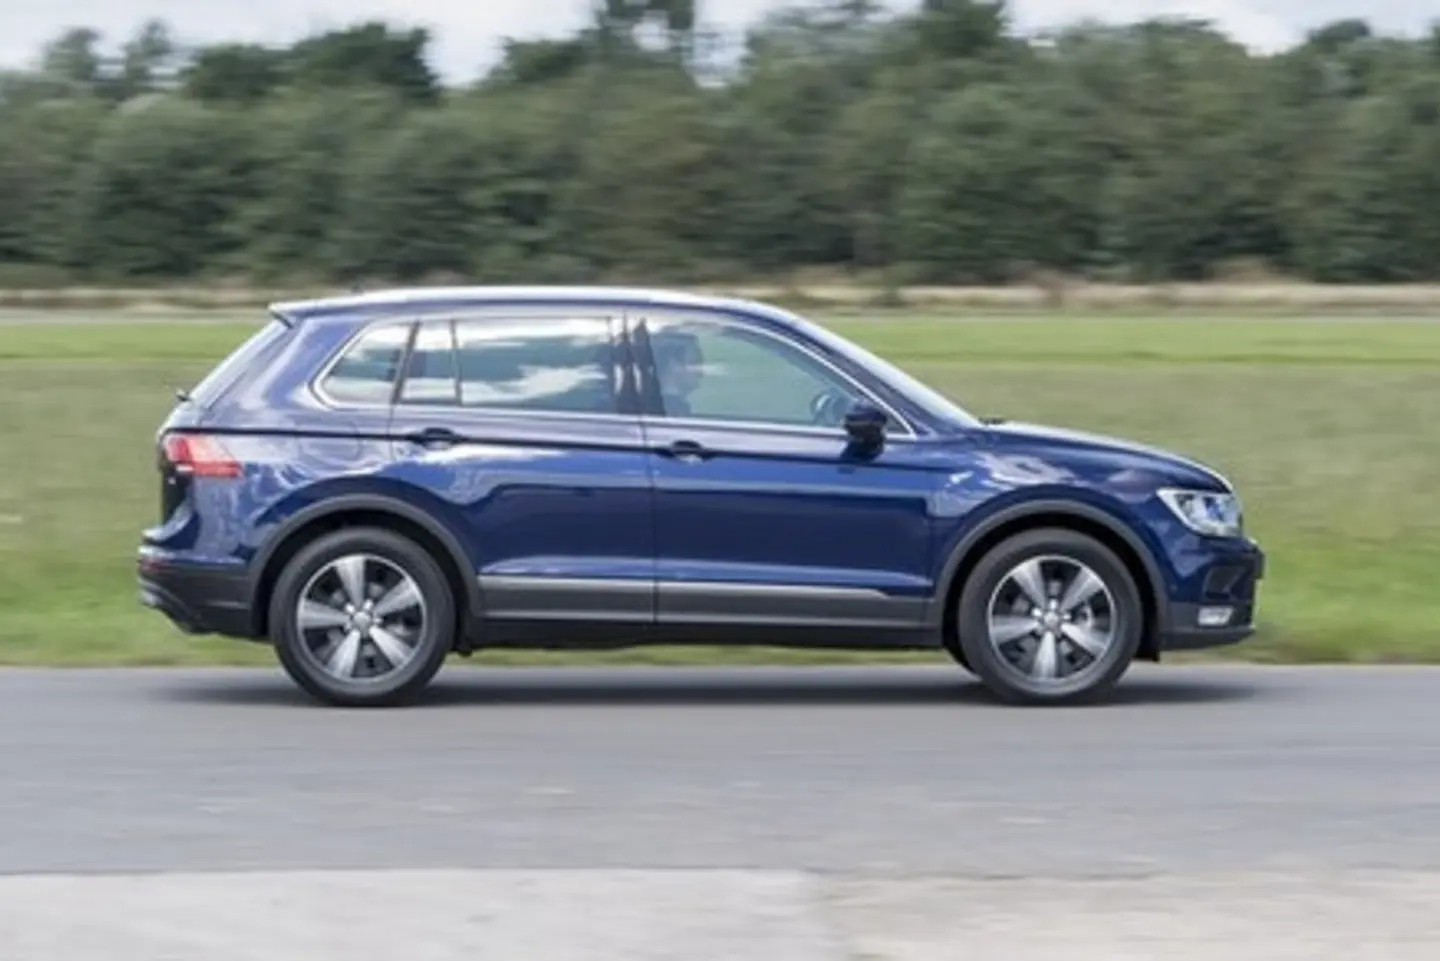 The side exterior of a blue Volkswagen Tiguan